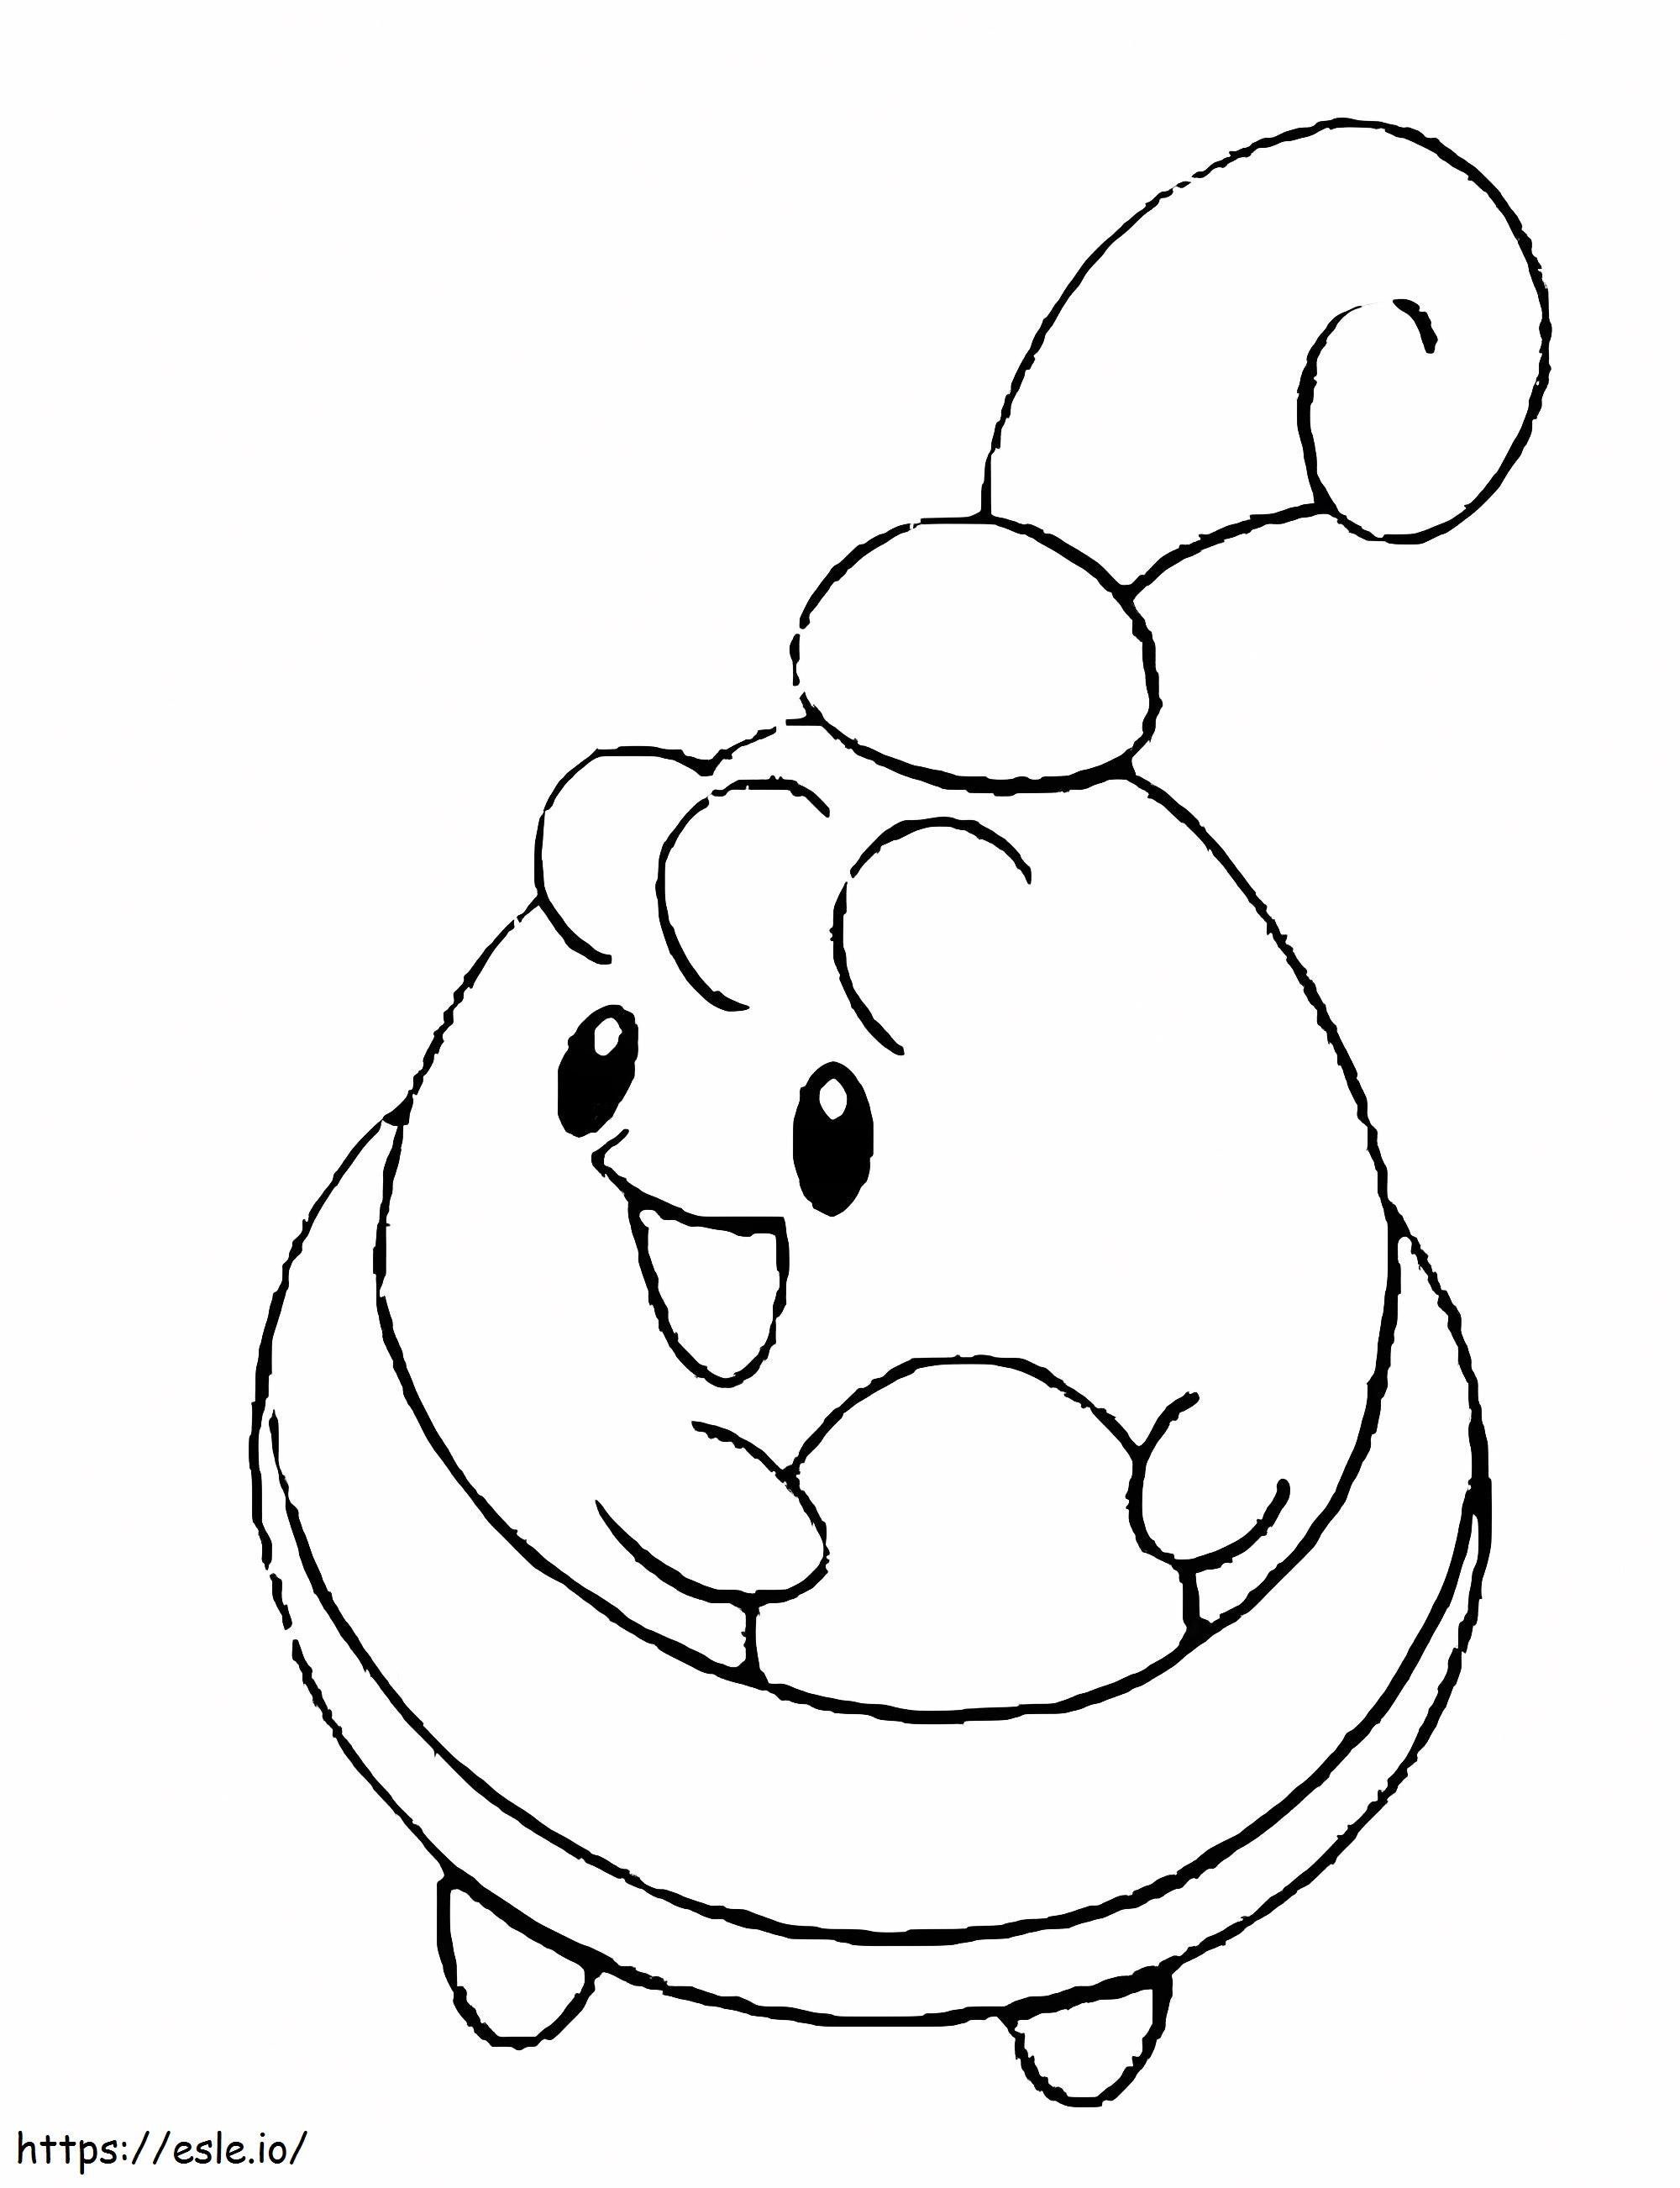 Happiny Gen 4 Pokemon coloring page